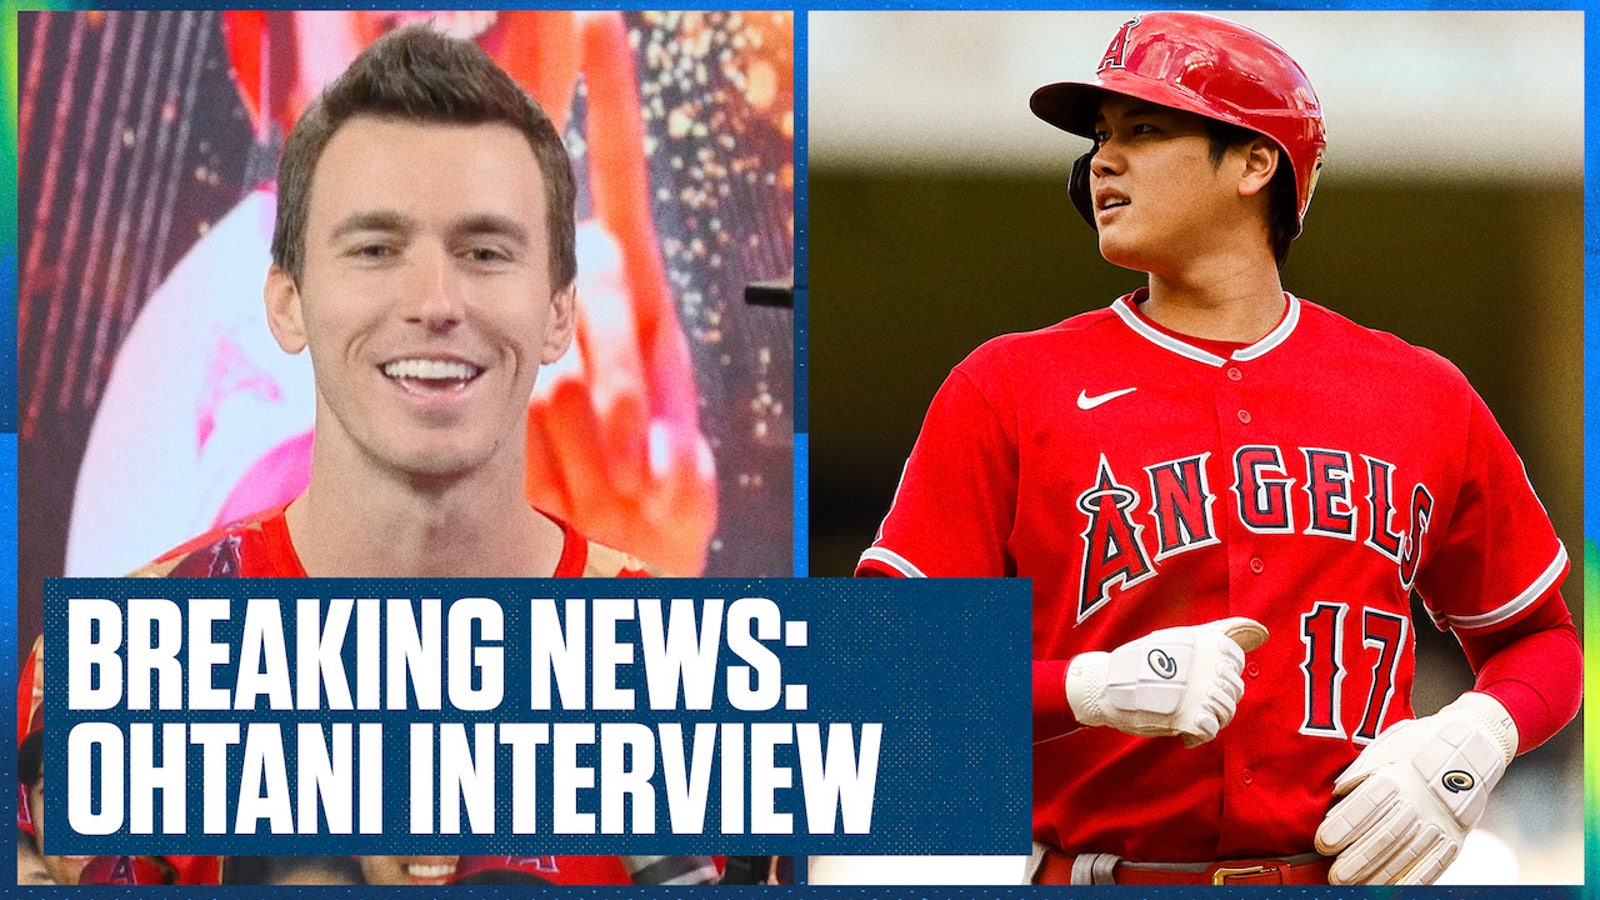 Shohei Ohtani interview with Ben Verlander to air Oct. 18